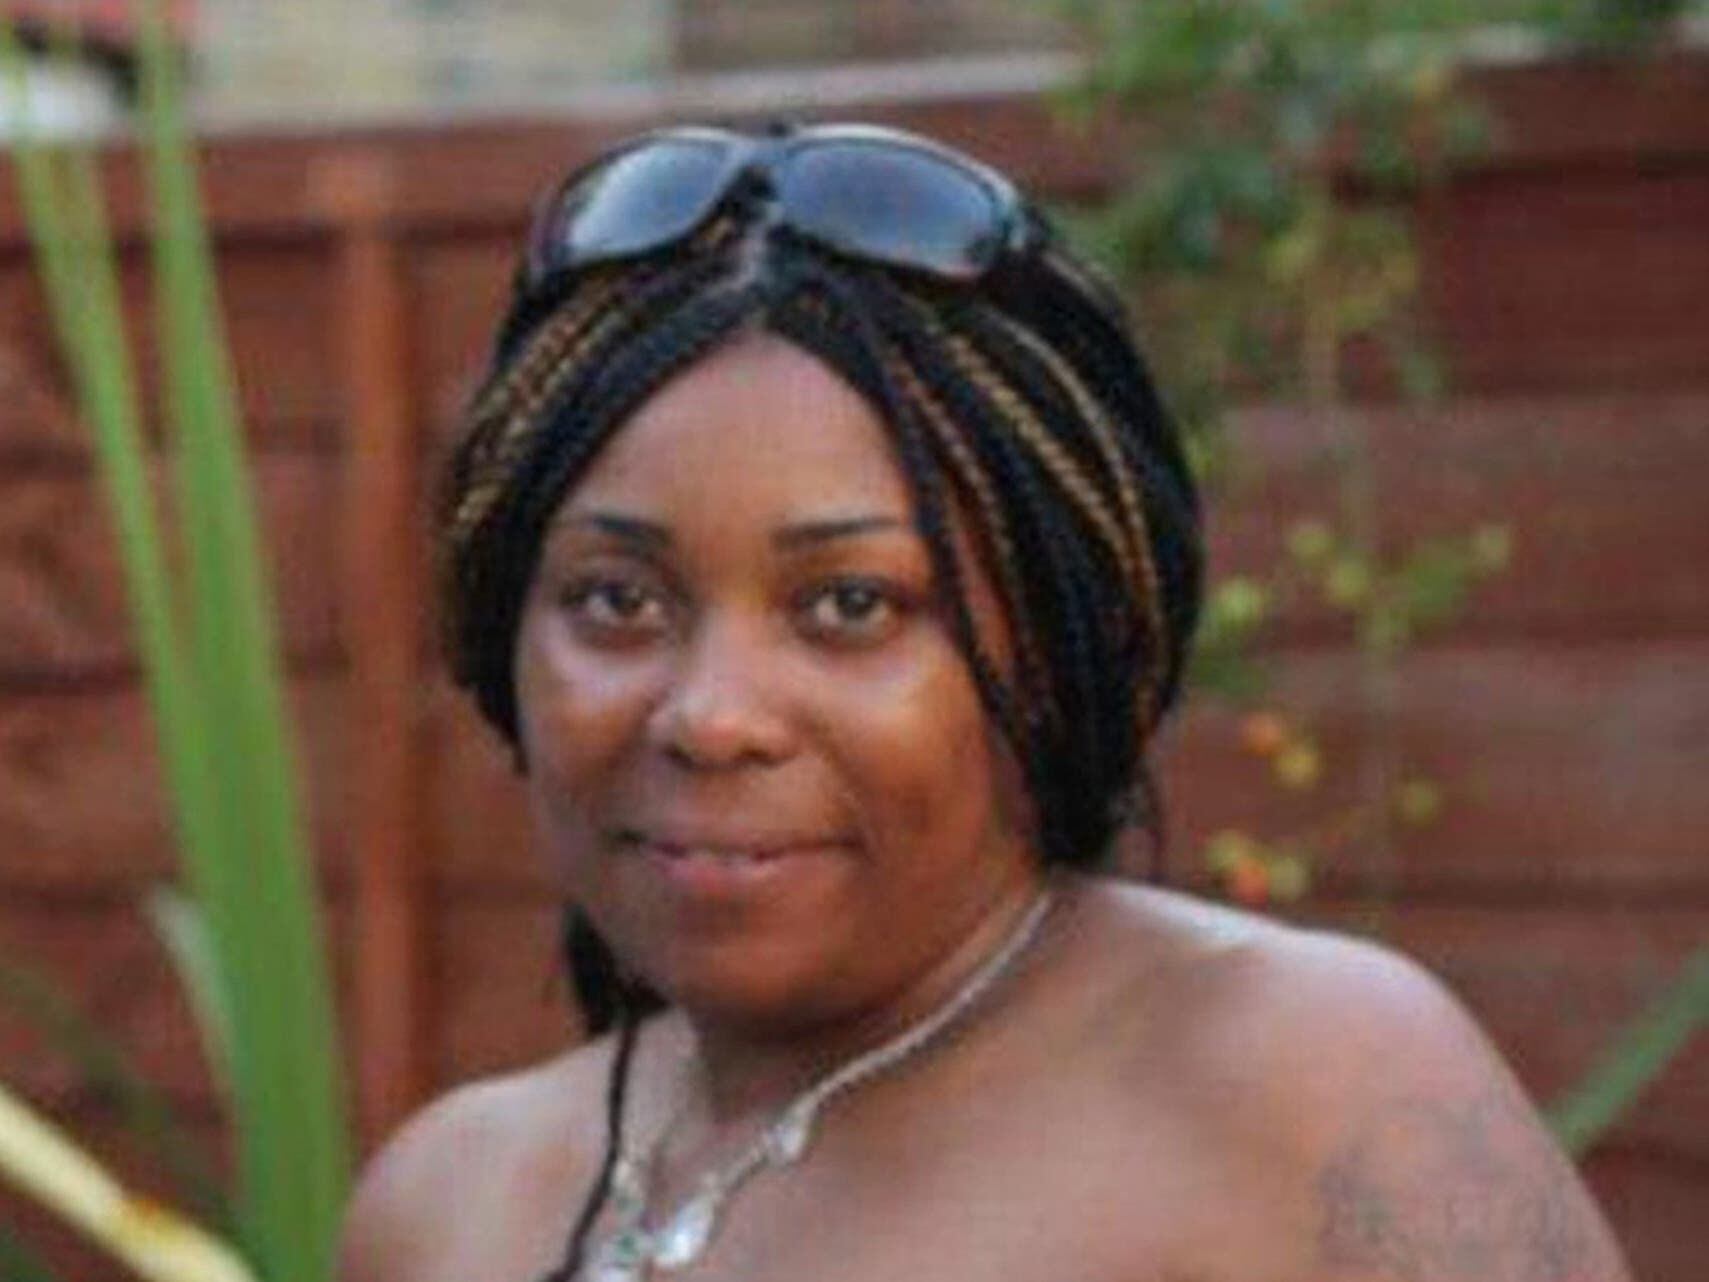 Mother-of-two died trying to protect family, court told